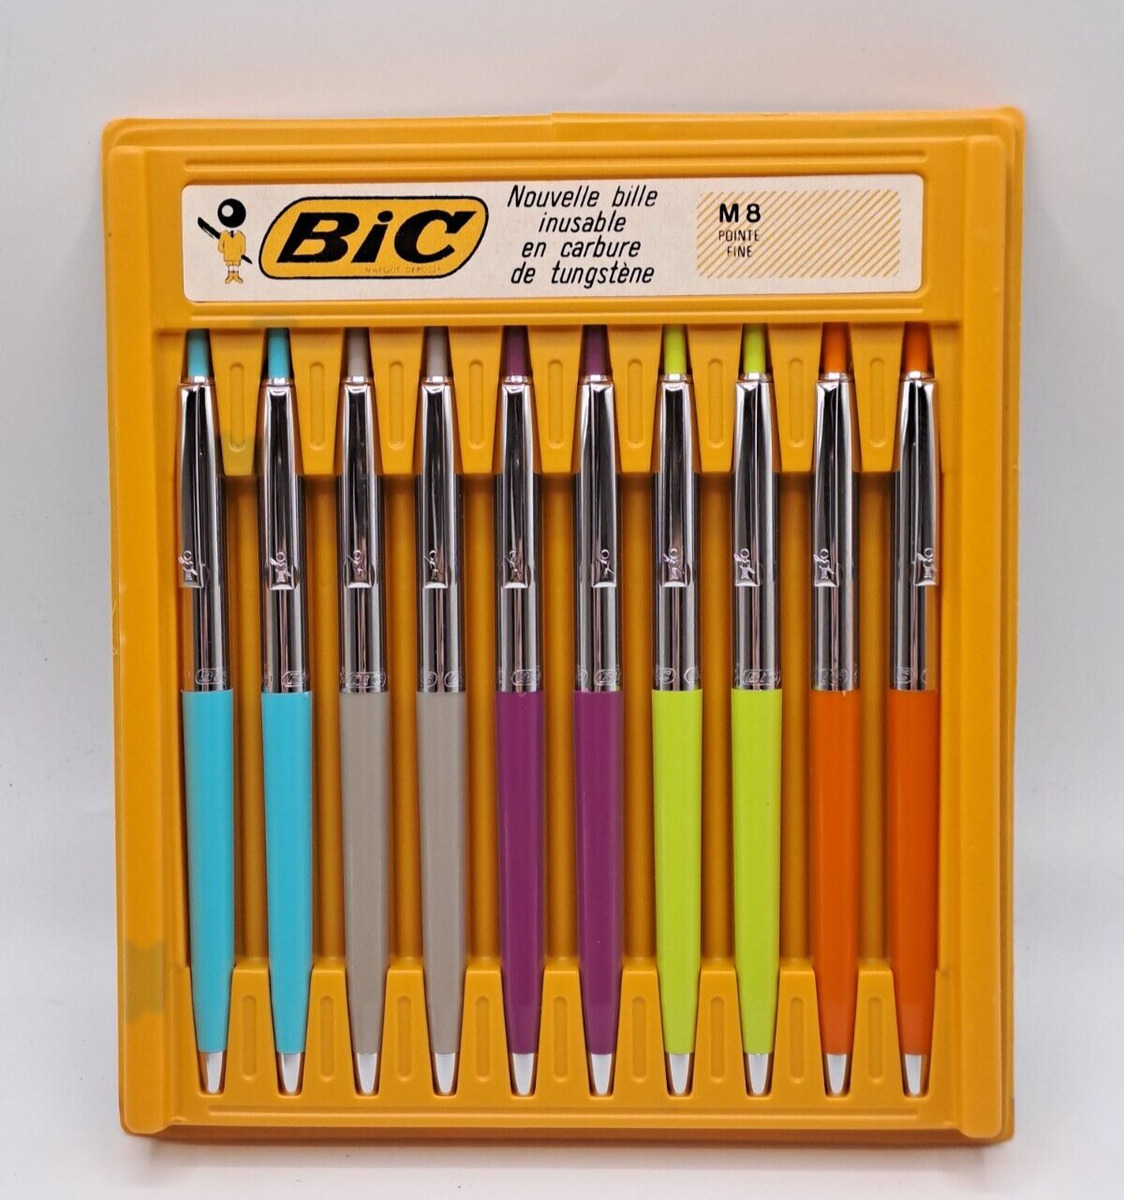 Vintage Penne BIC M8 penne colorate anni 70 ball pen vintage new old stock